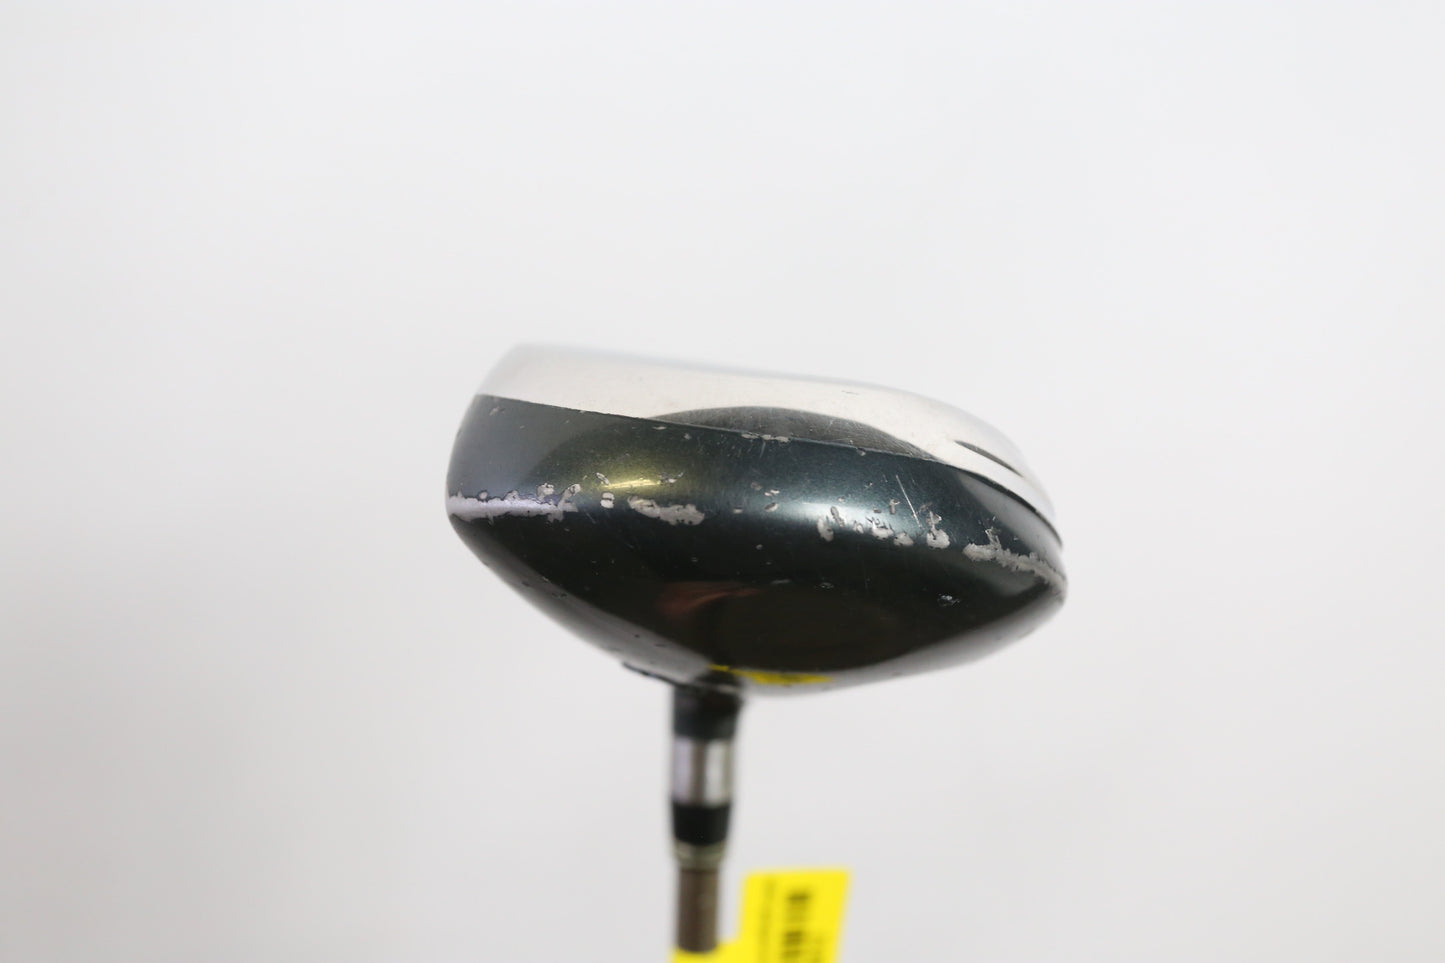 Used Cobra SS Hyper Steel Offset 3-Wood - Right-Handed - 15 Degrees - Ladies Flex